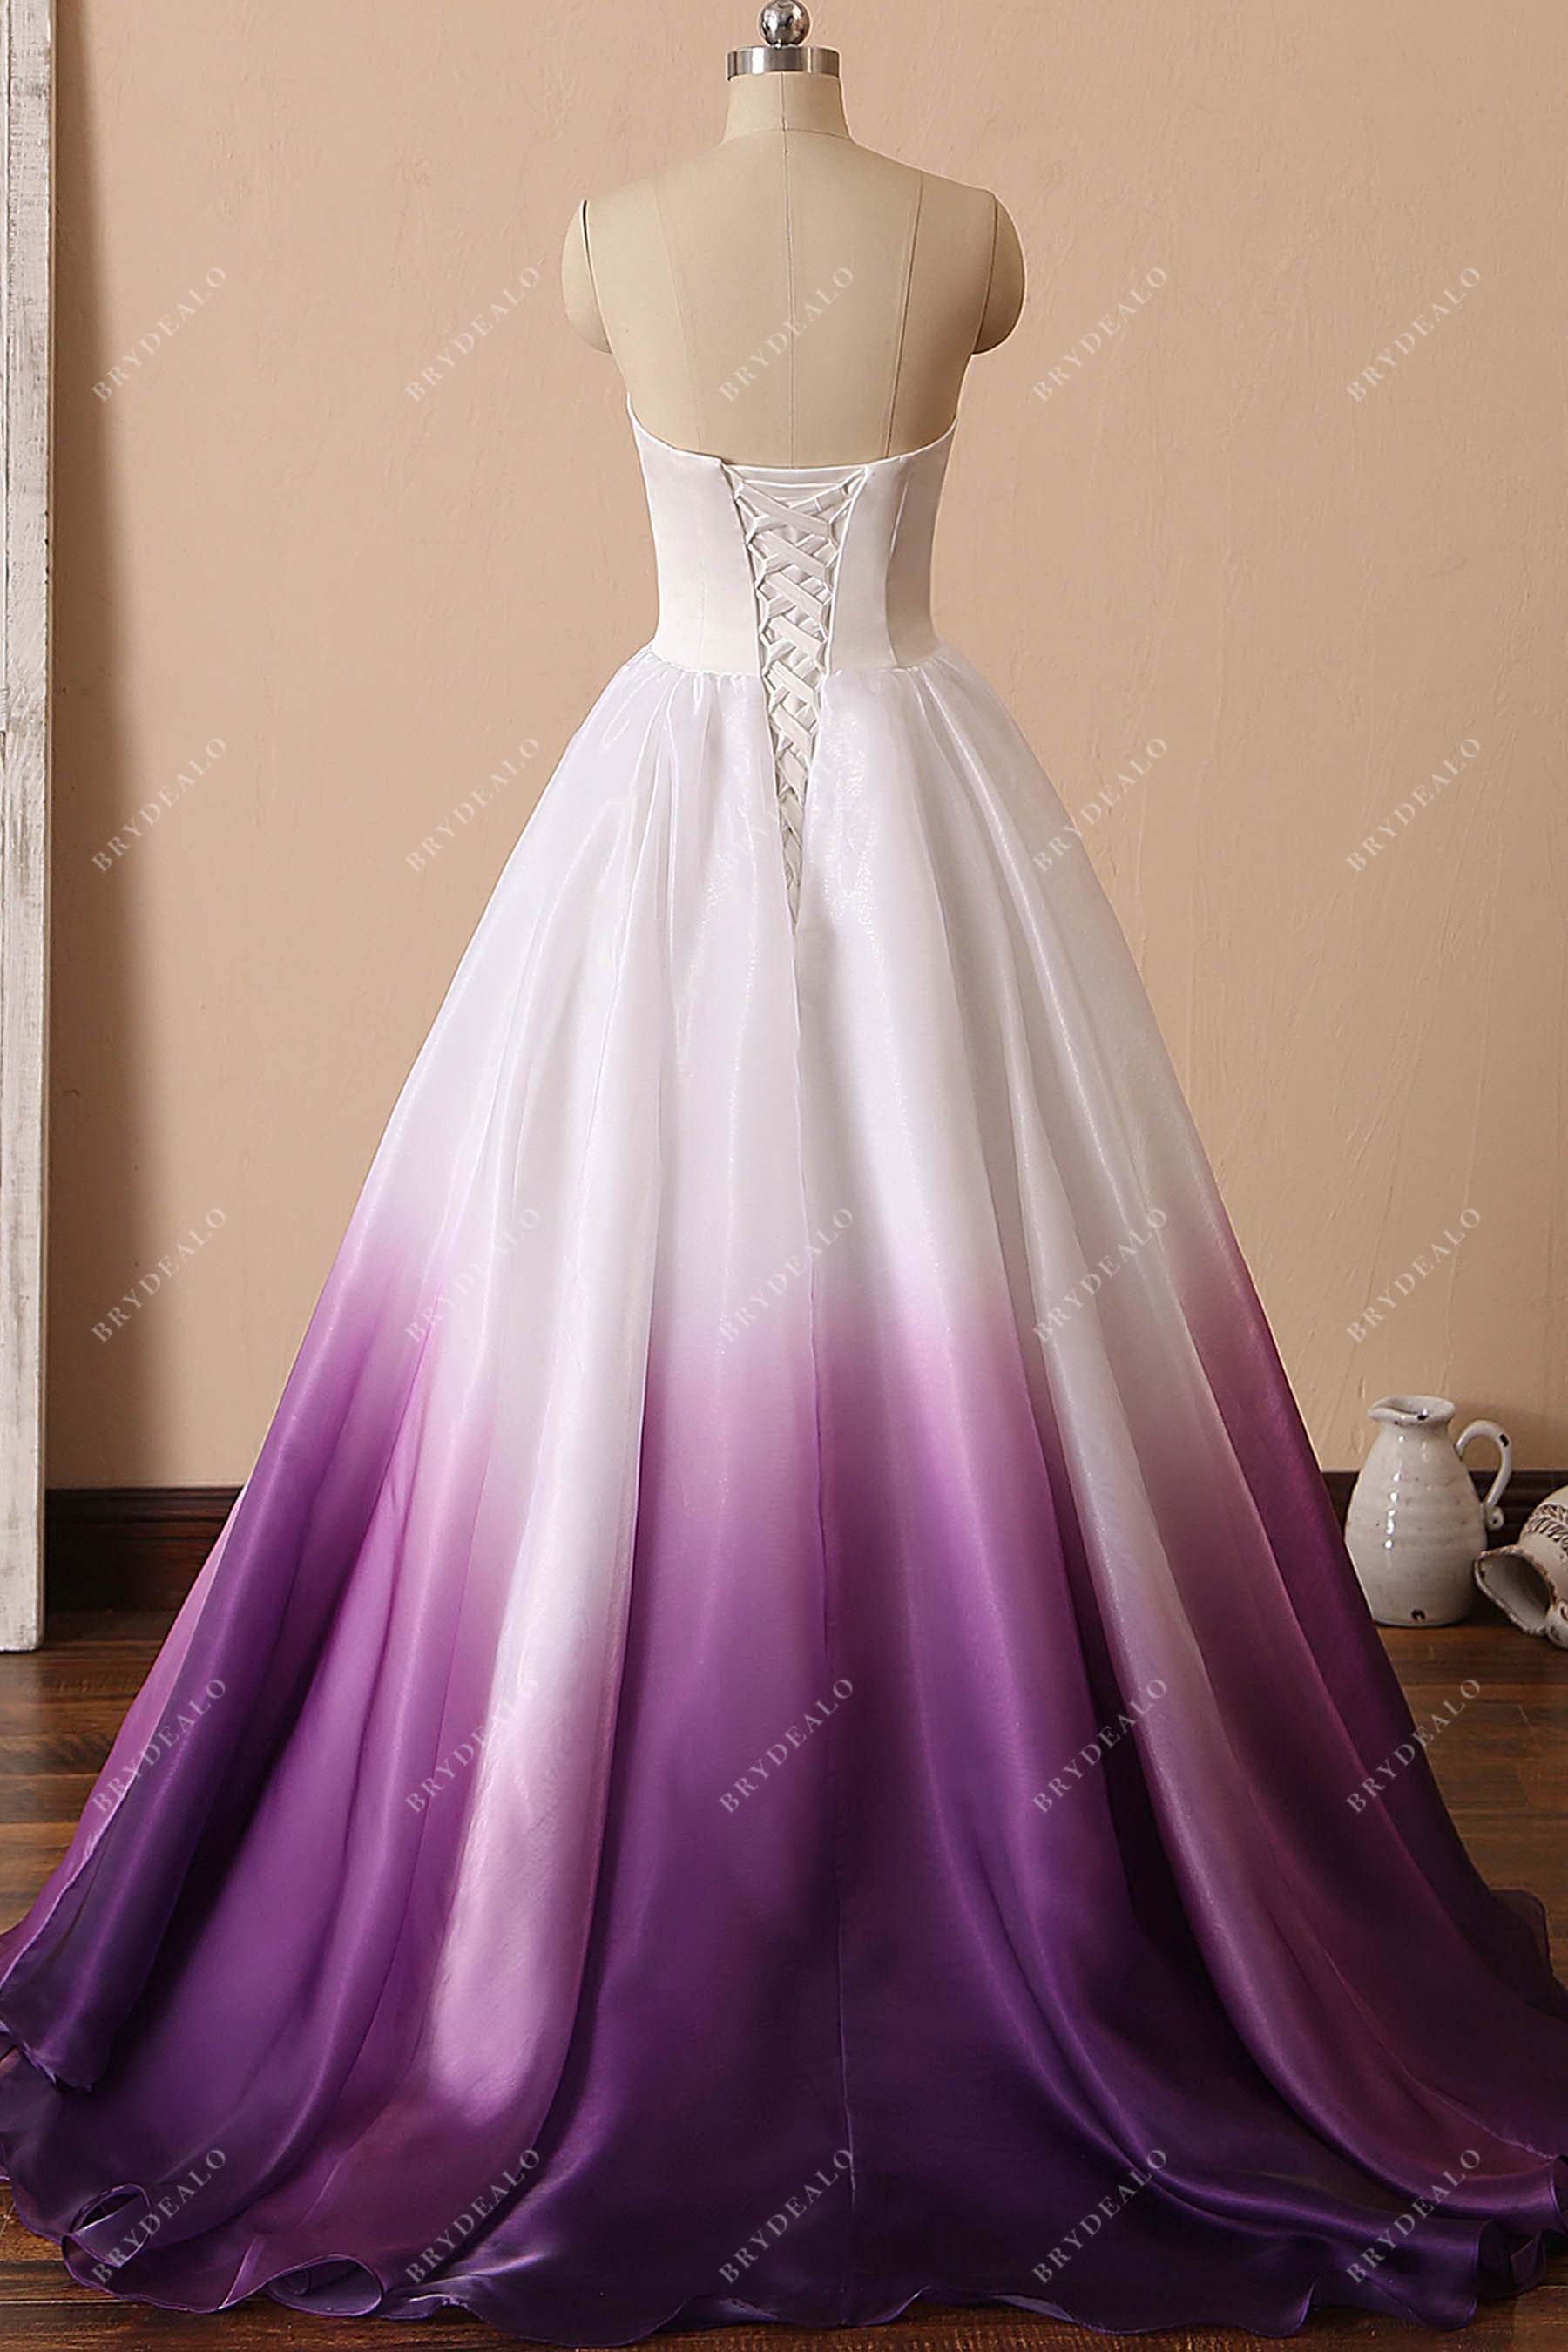 Ombre Purple V-cut Wedding Ball Gown | Lace White And Purple Wedding Dress  | suturasonline.com.br